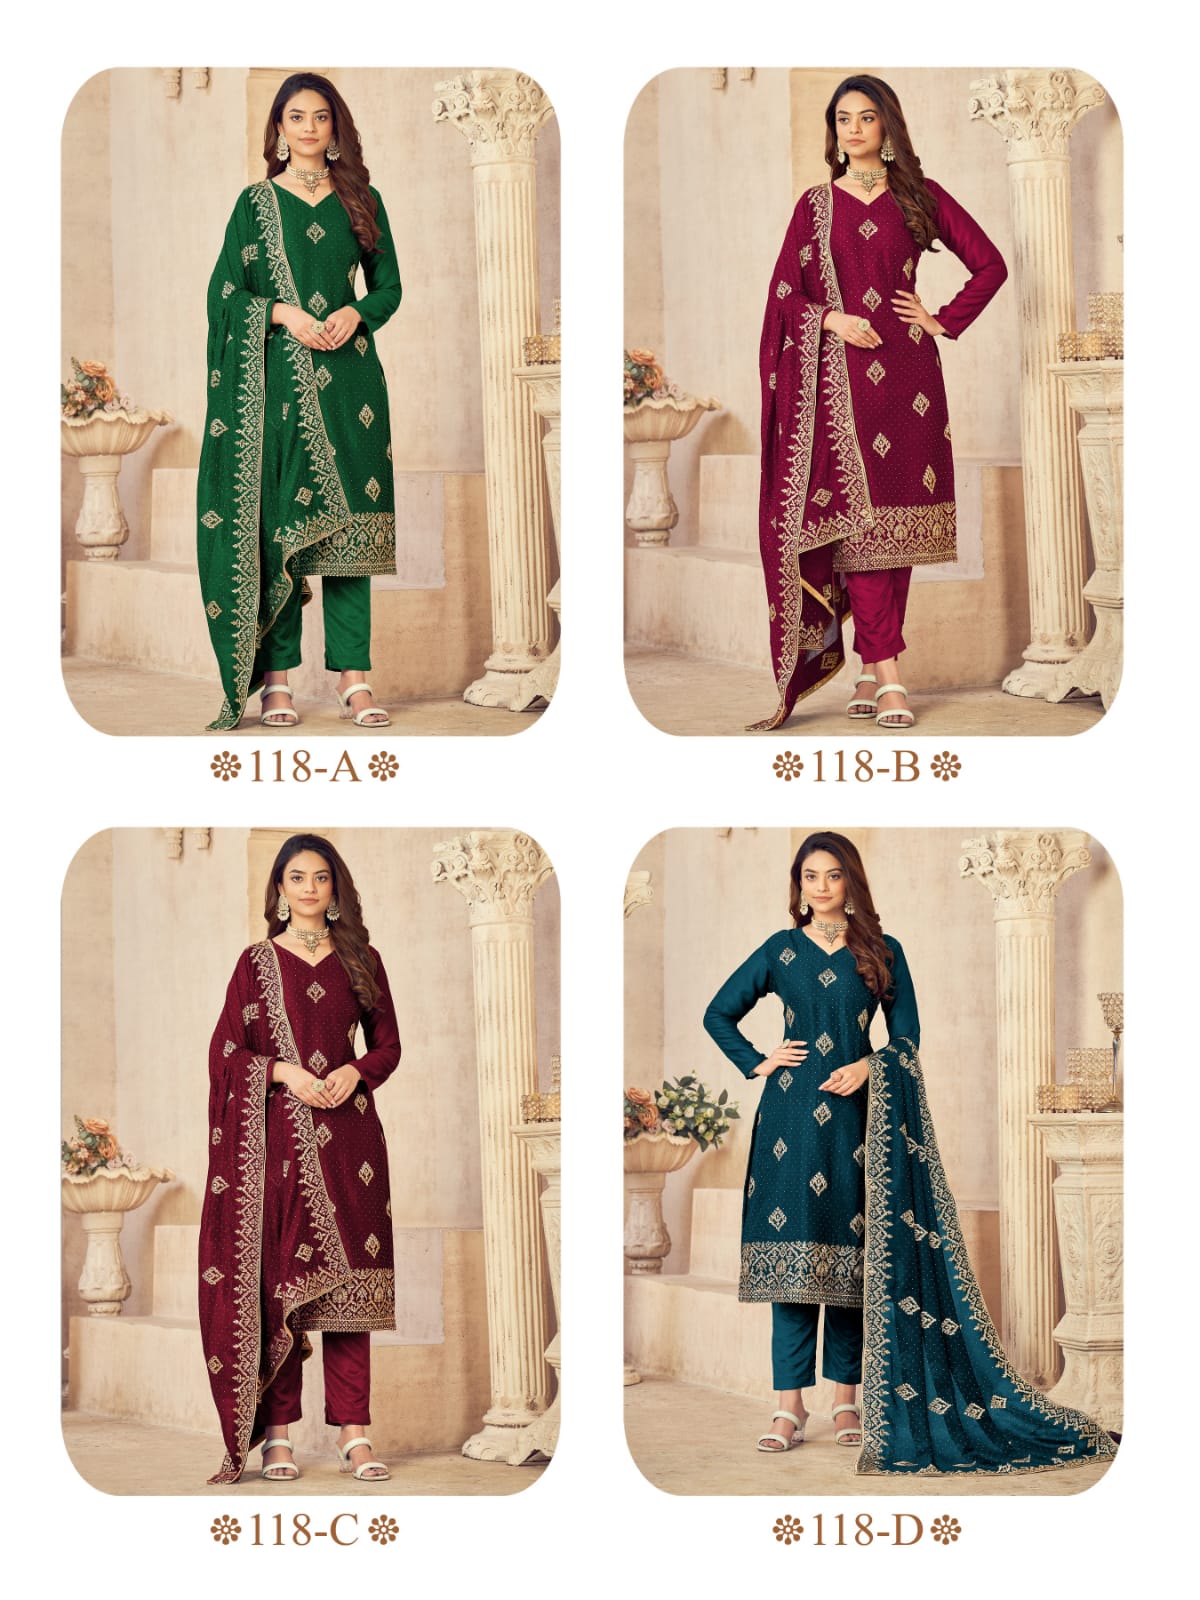 Heavy blooming vichitra with full heavy embroidery work and diamond Work Kurtis